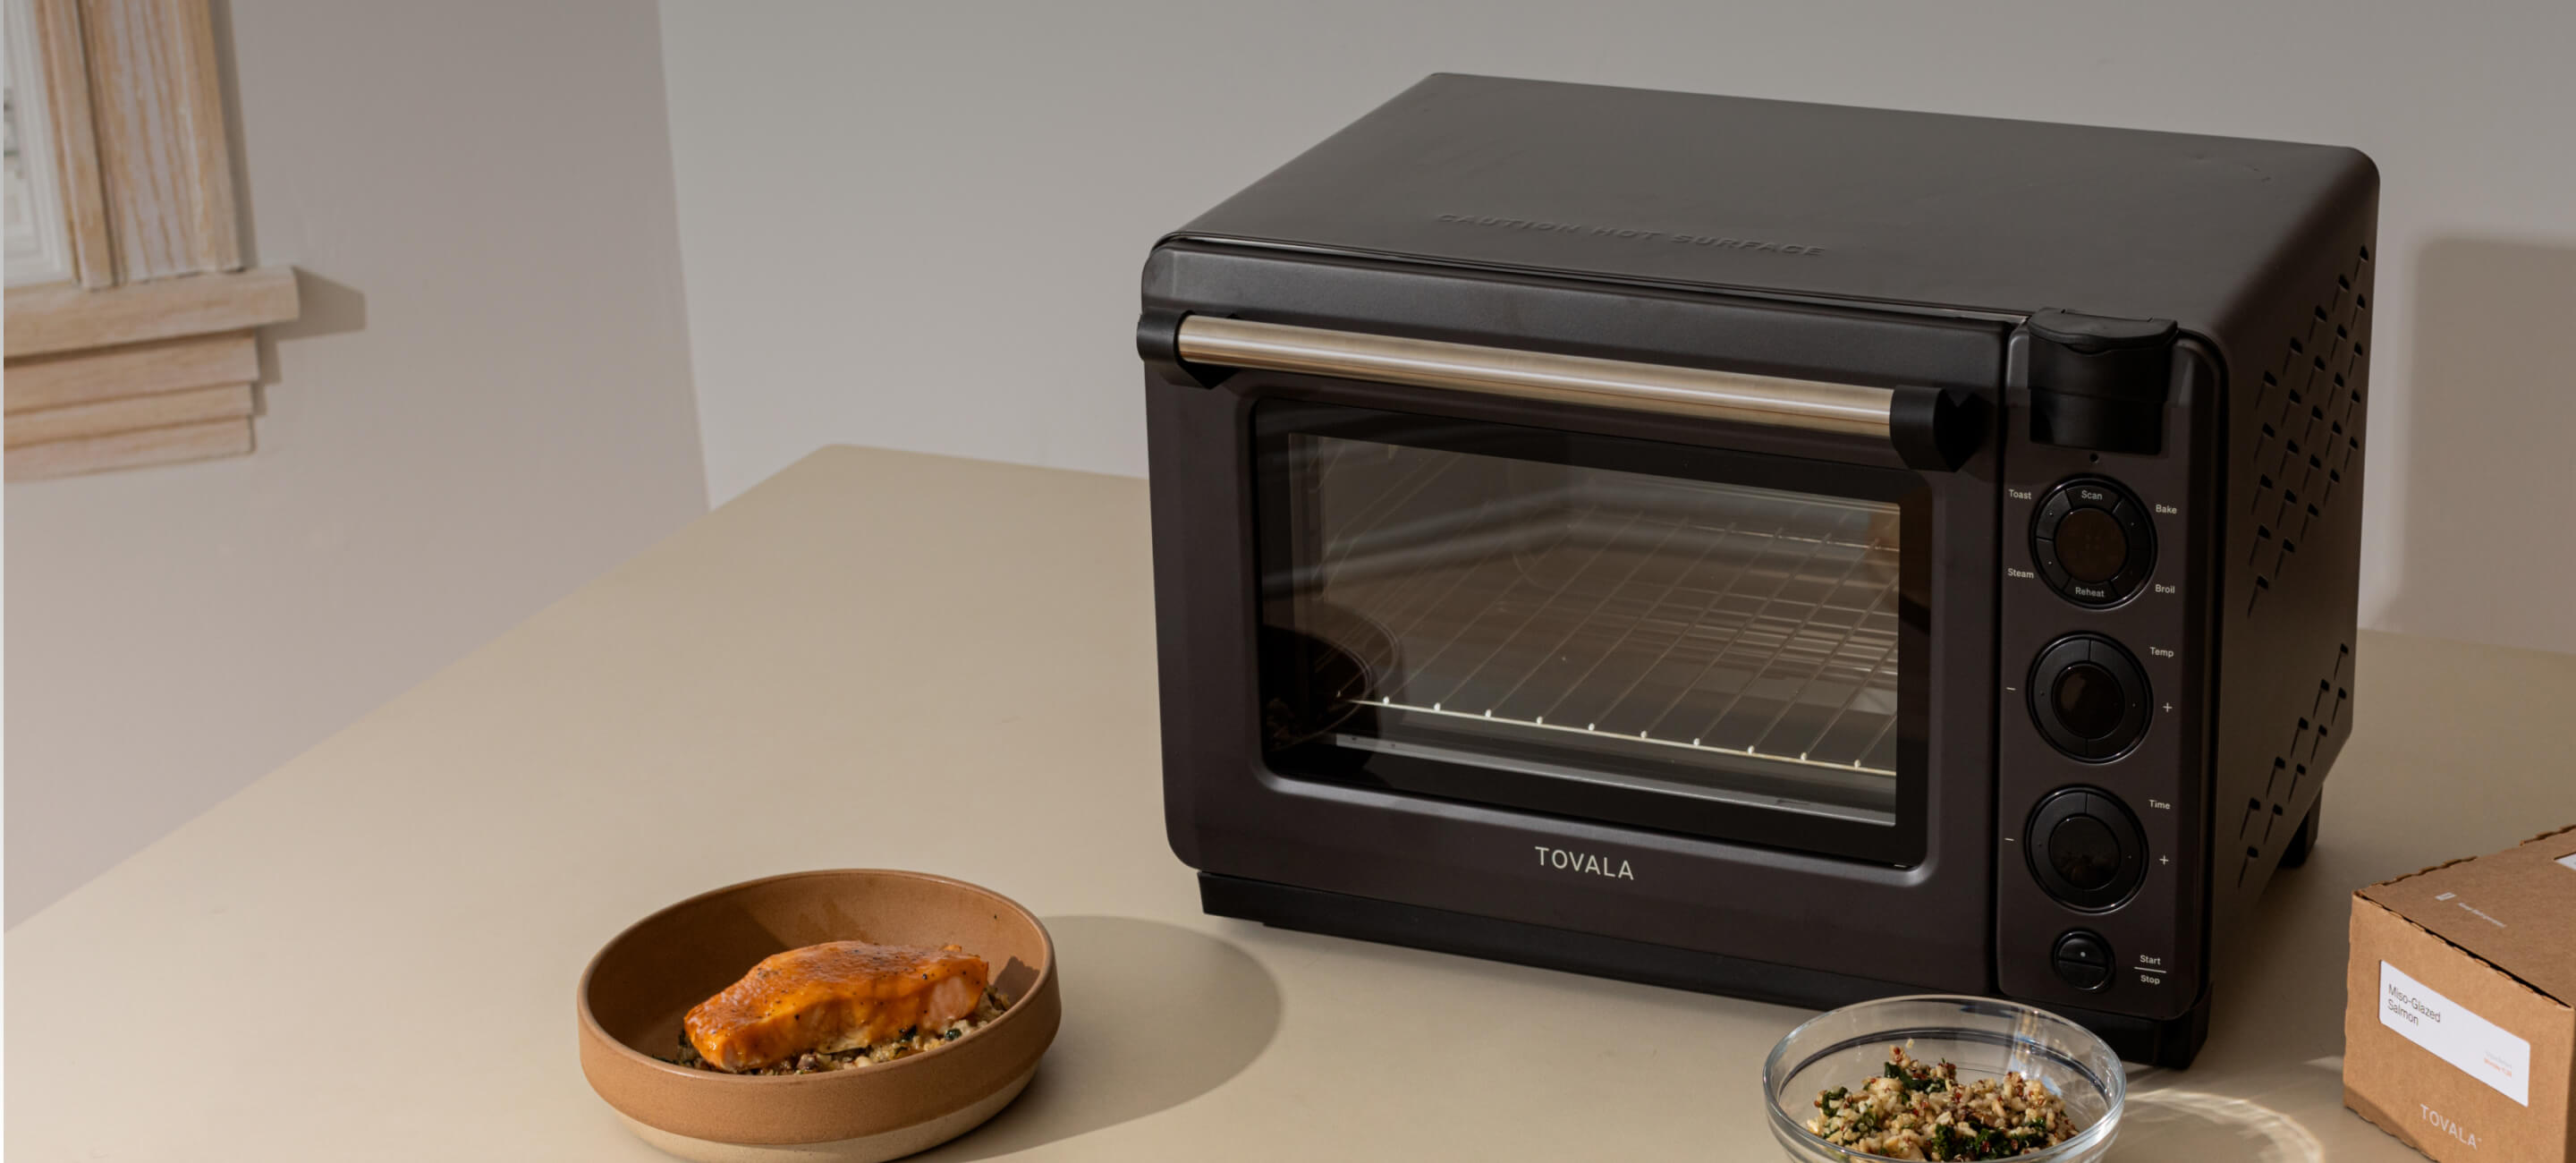 Tovala Holiday 2022 Deal: Get $49 Tovala Smart Oven With Six Week Meal  Commitment